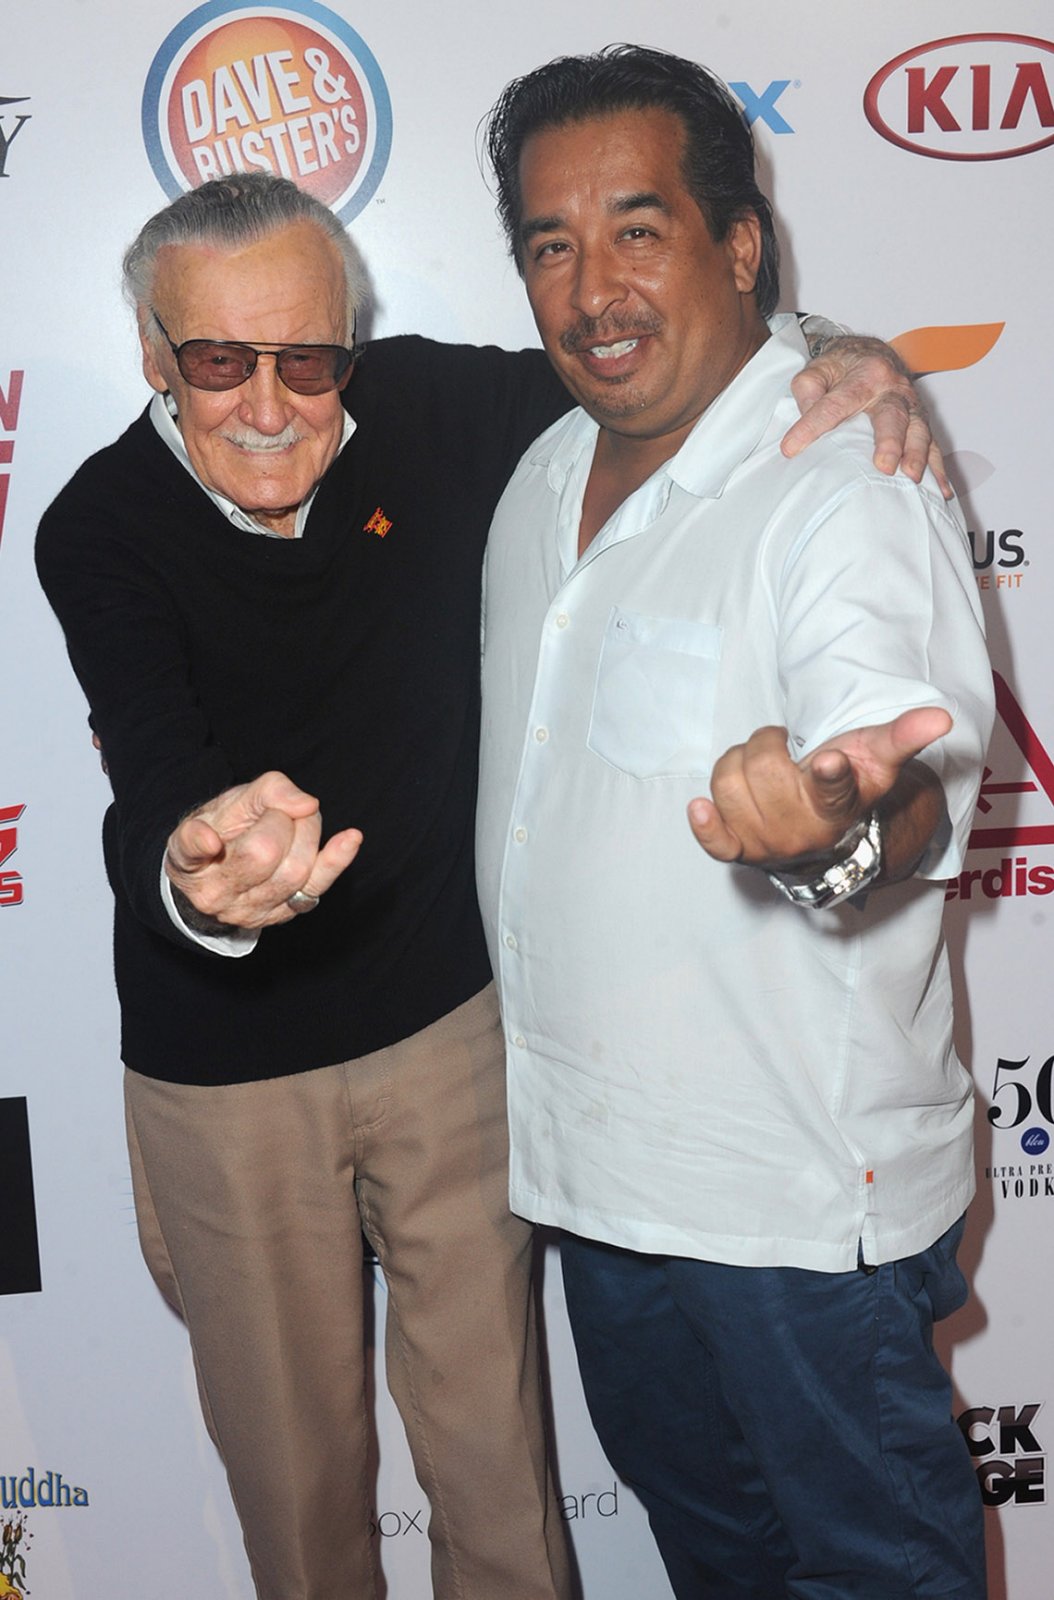 RIP Stan The Man Lee. Seems like he might've be a fan?! Too bad